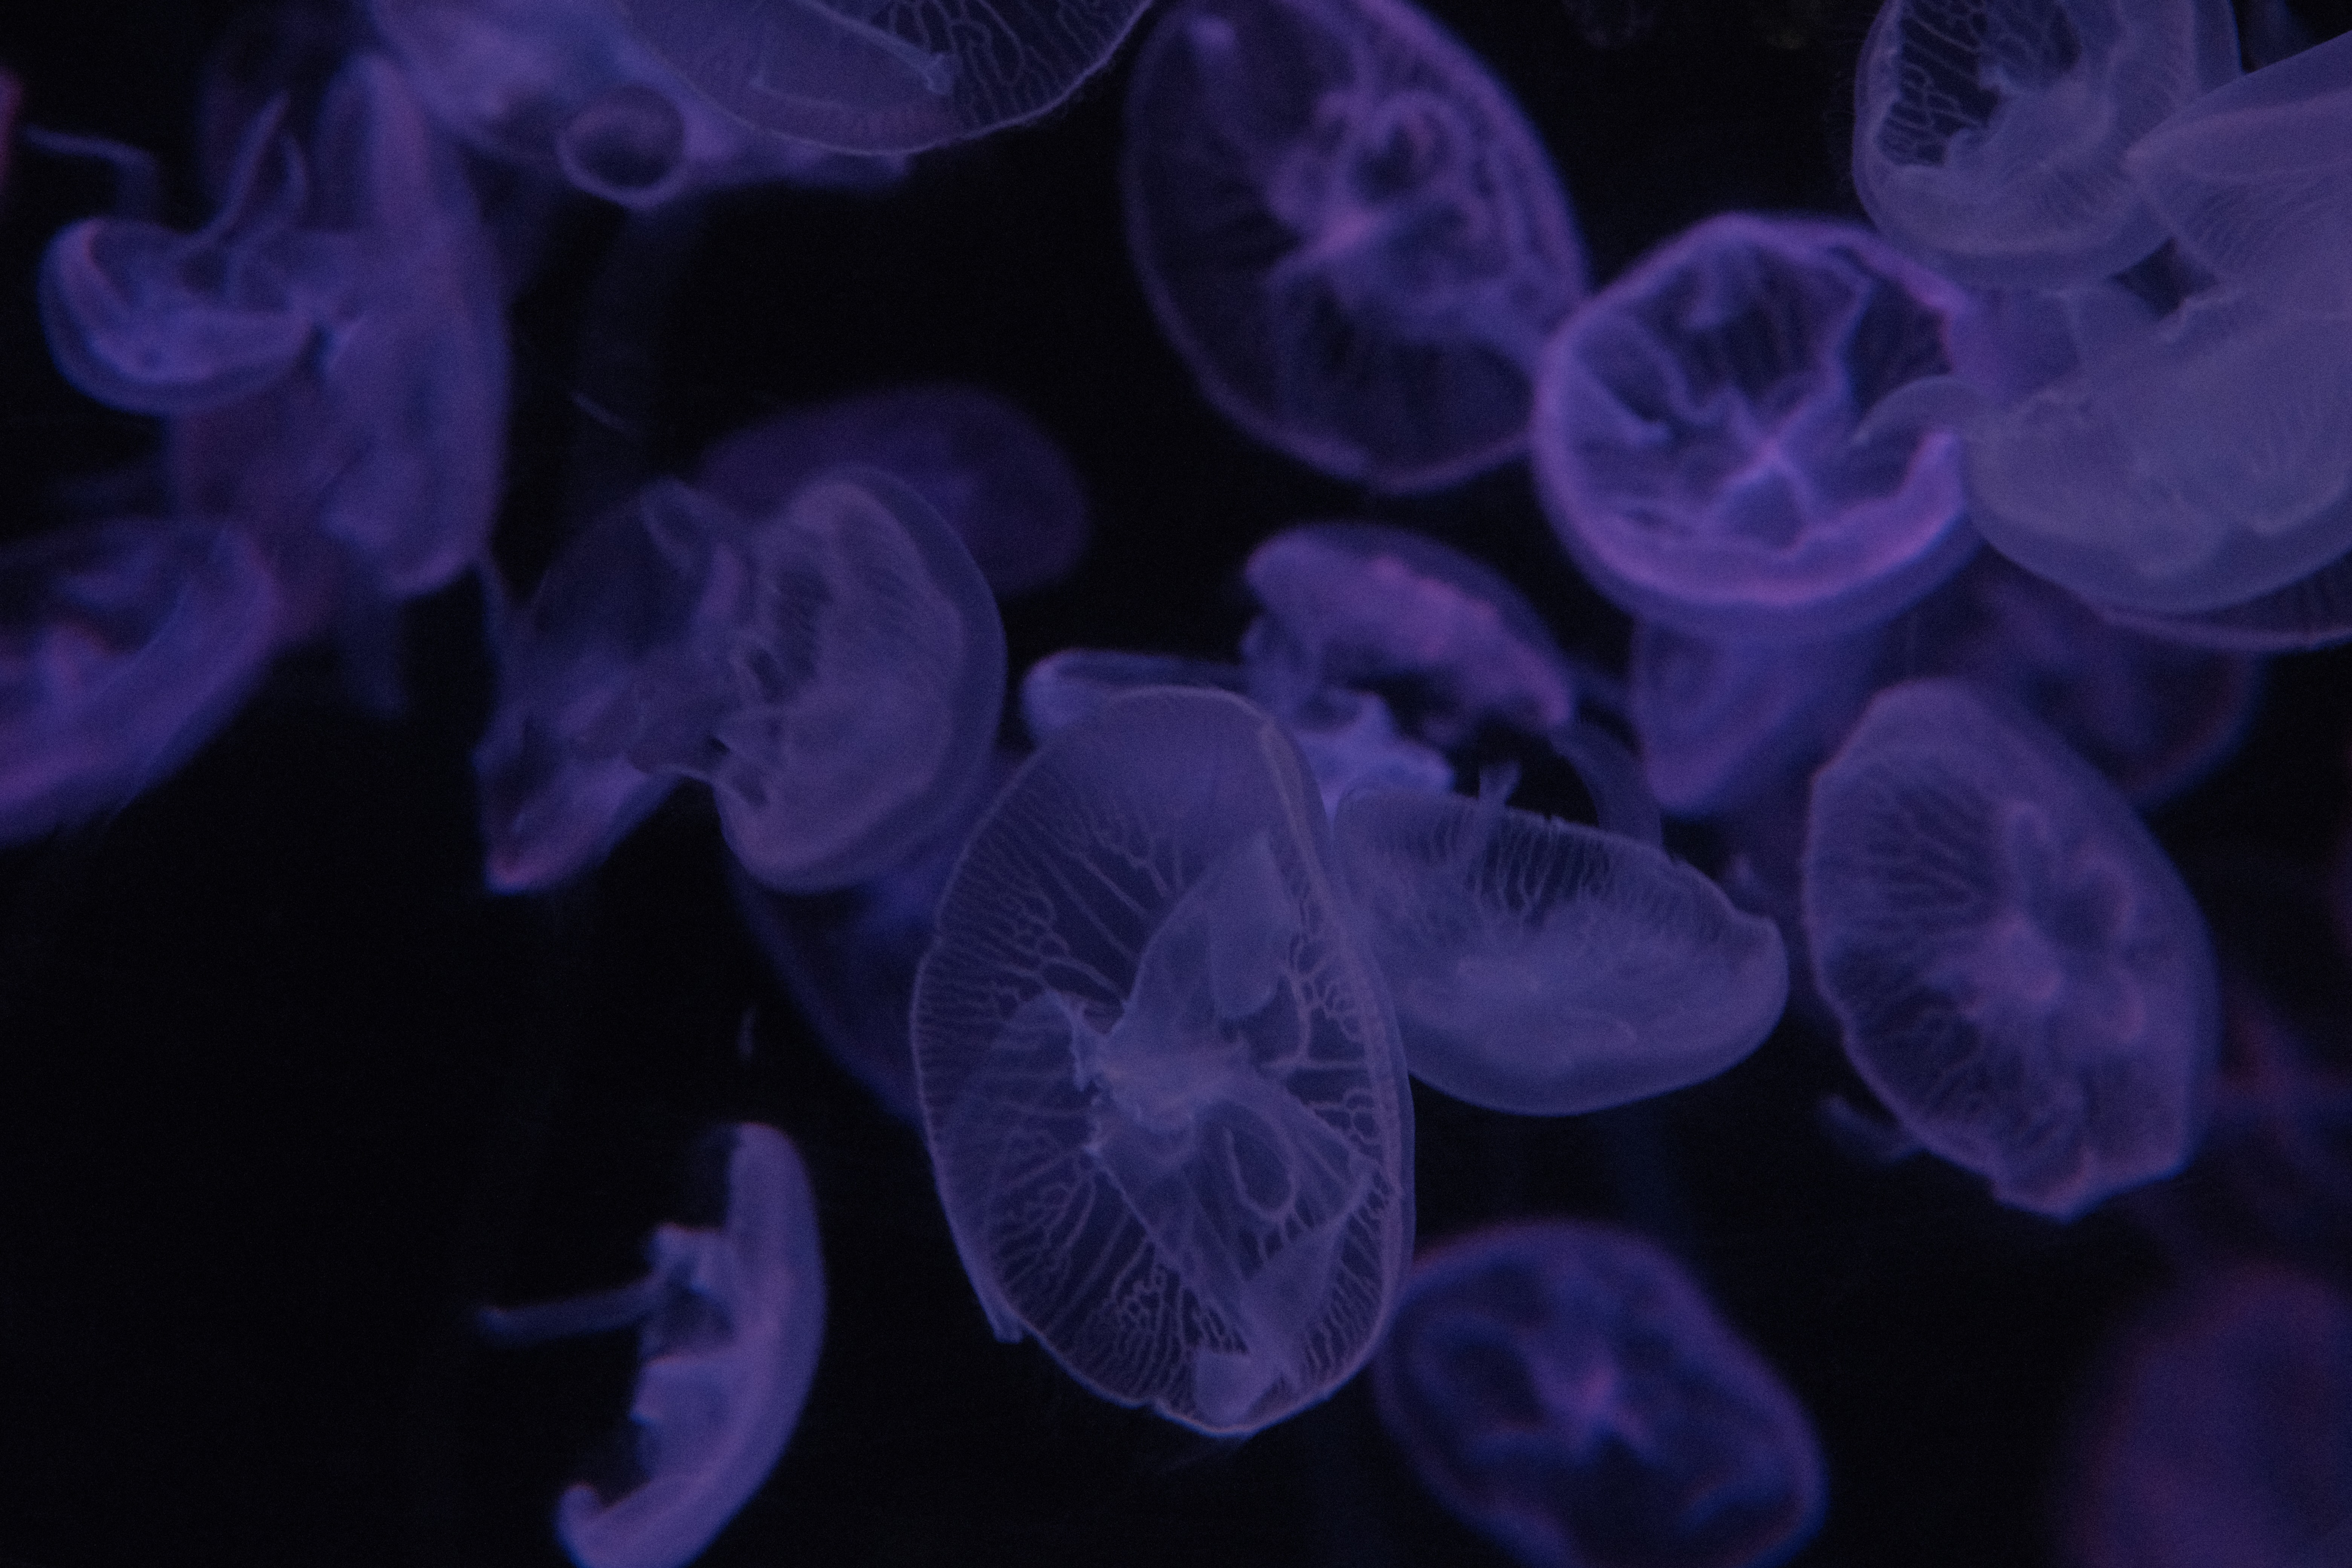 jellyfish, violet, dark, purple, handsomely, it's beautiful 4K for PC